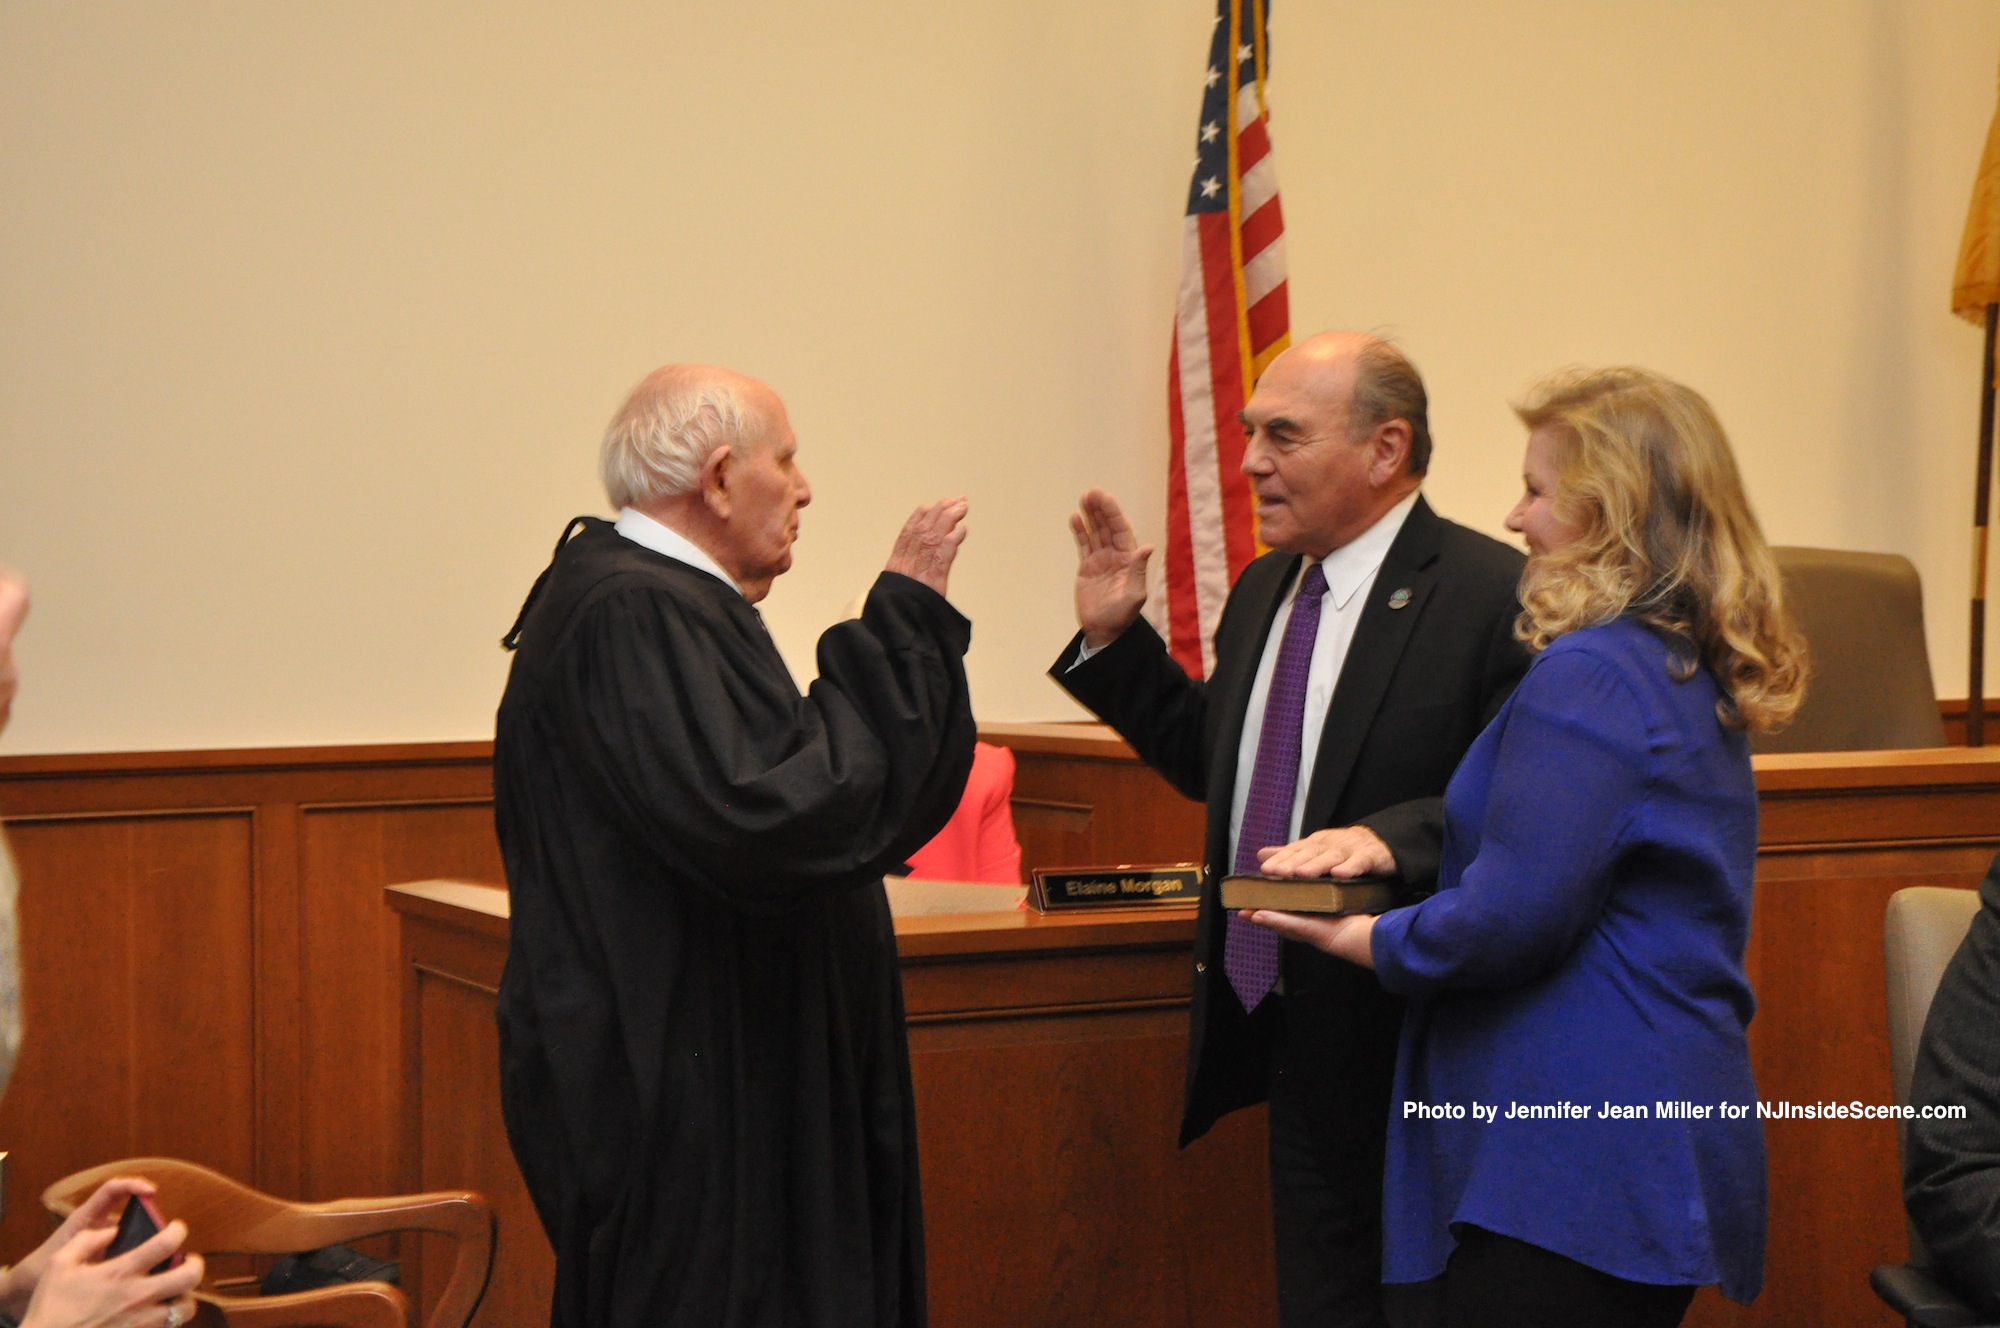 Freeholder Richard Vohden, with his wife, Faith, is sworn in for his term, by Judge Frederic Weber. Vohden was chosen by fellow freeholders as Freeholder Director, and was sworn in for that role a second time.